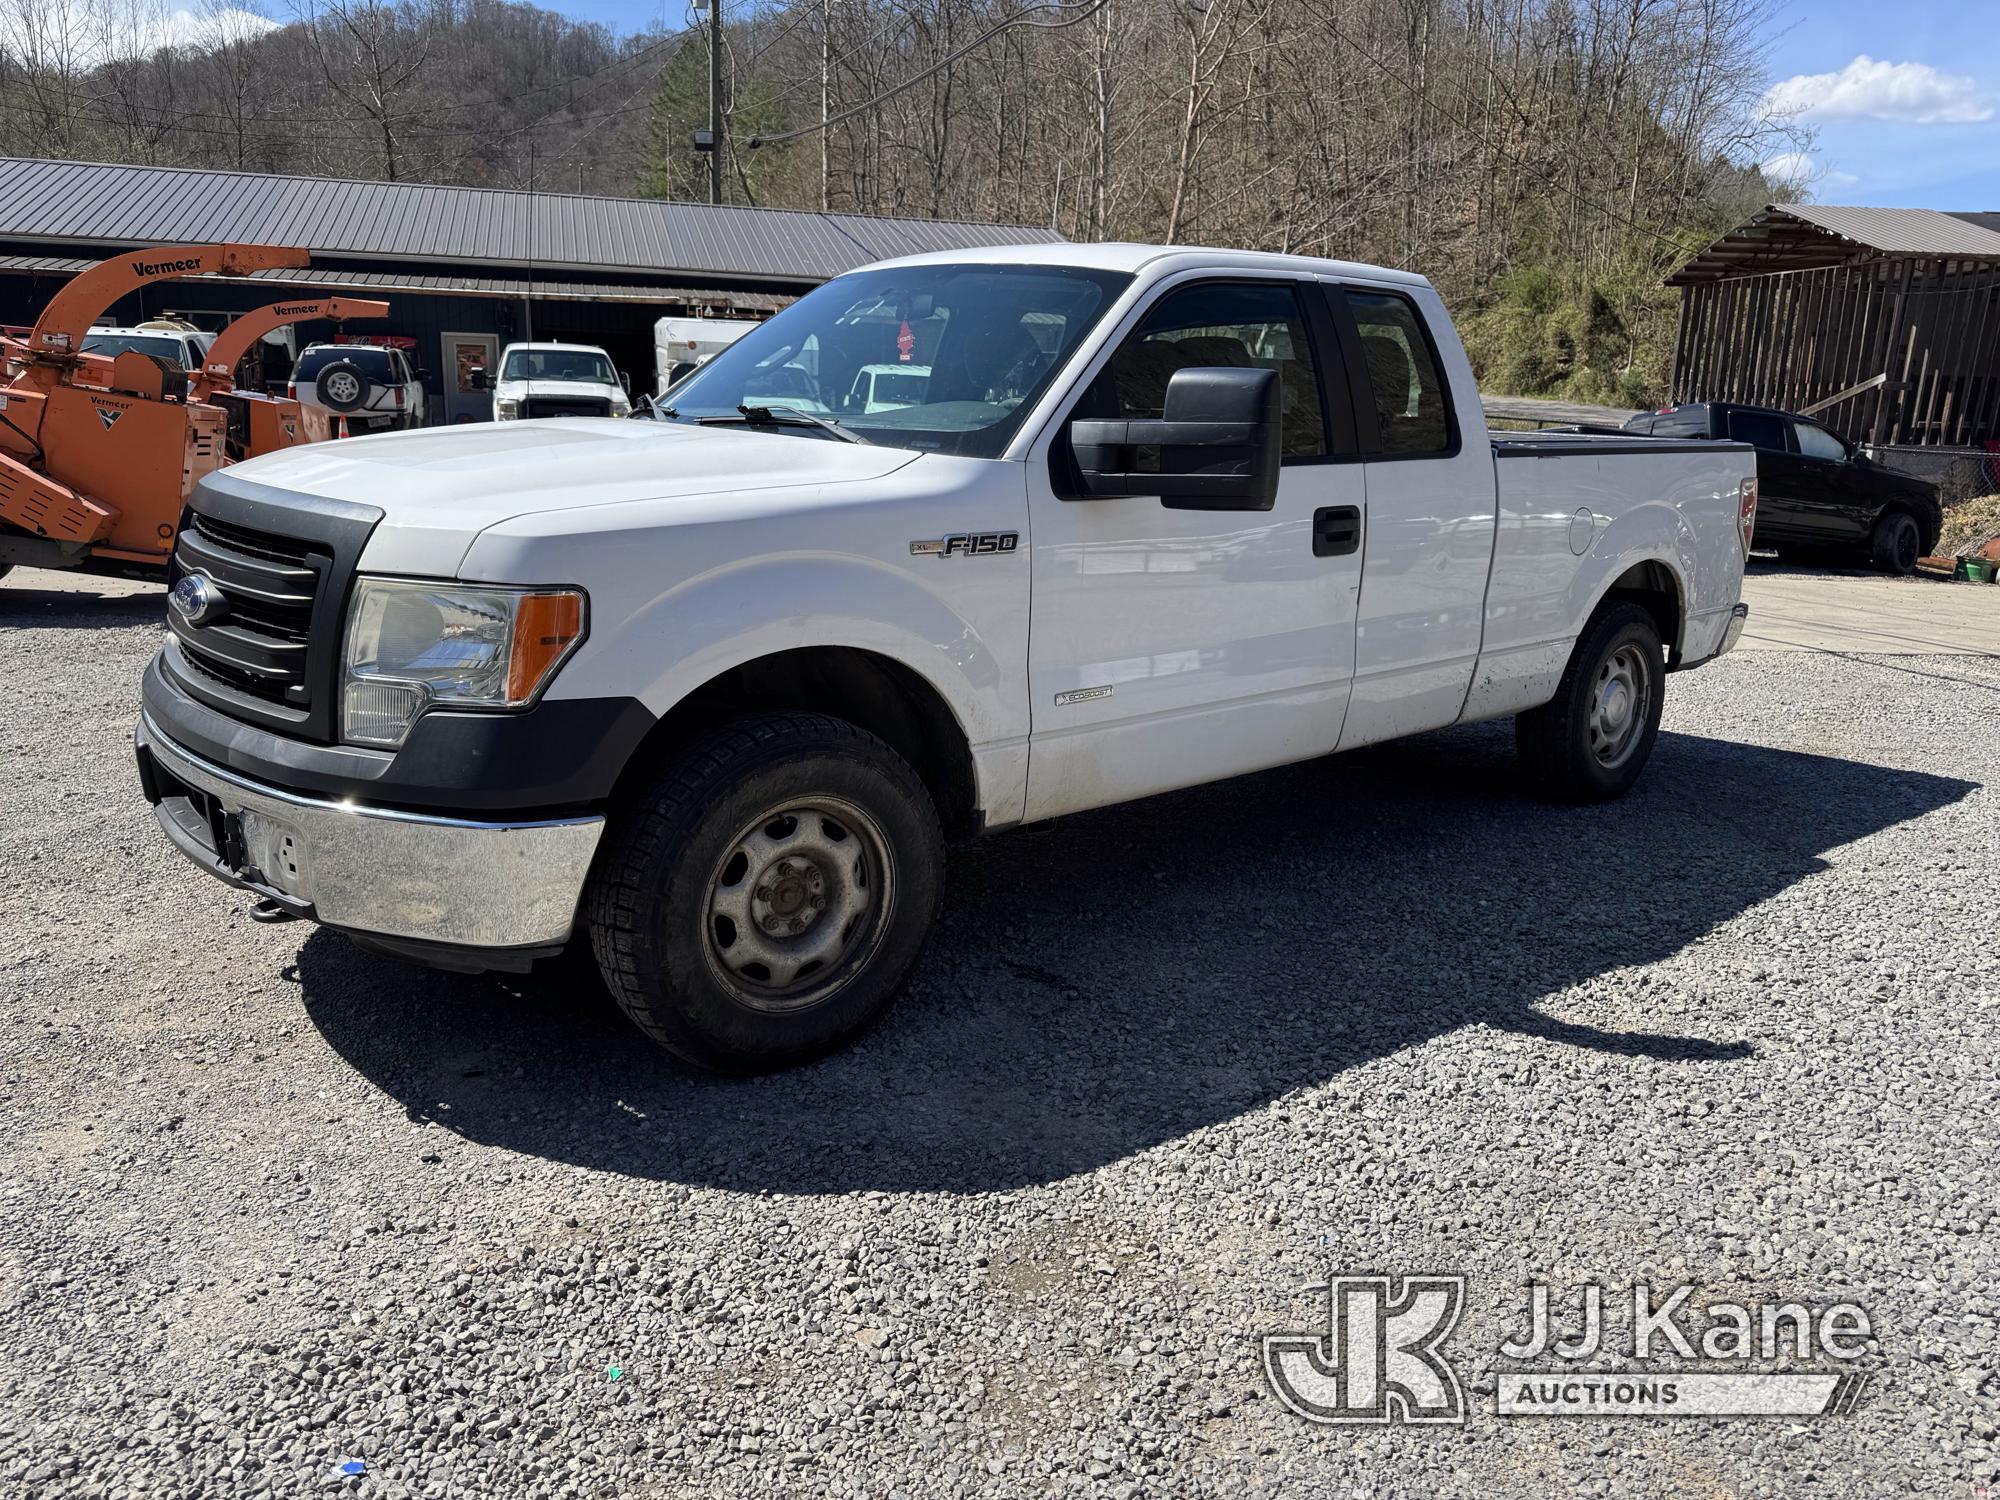 (Hanover, WV) 2014 Ford F150 4x4 Extended-Cab Pickup Truck, DIFFERENTIAL REAR ASSEMBLY Runs & Moves)